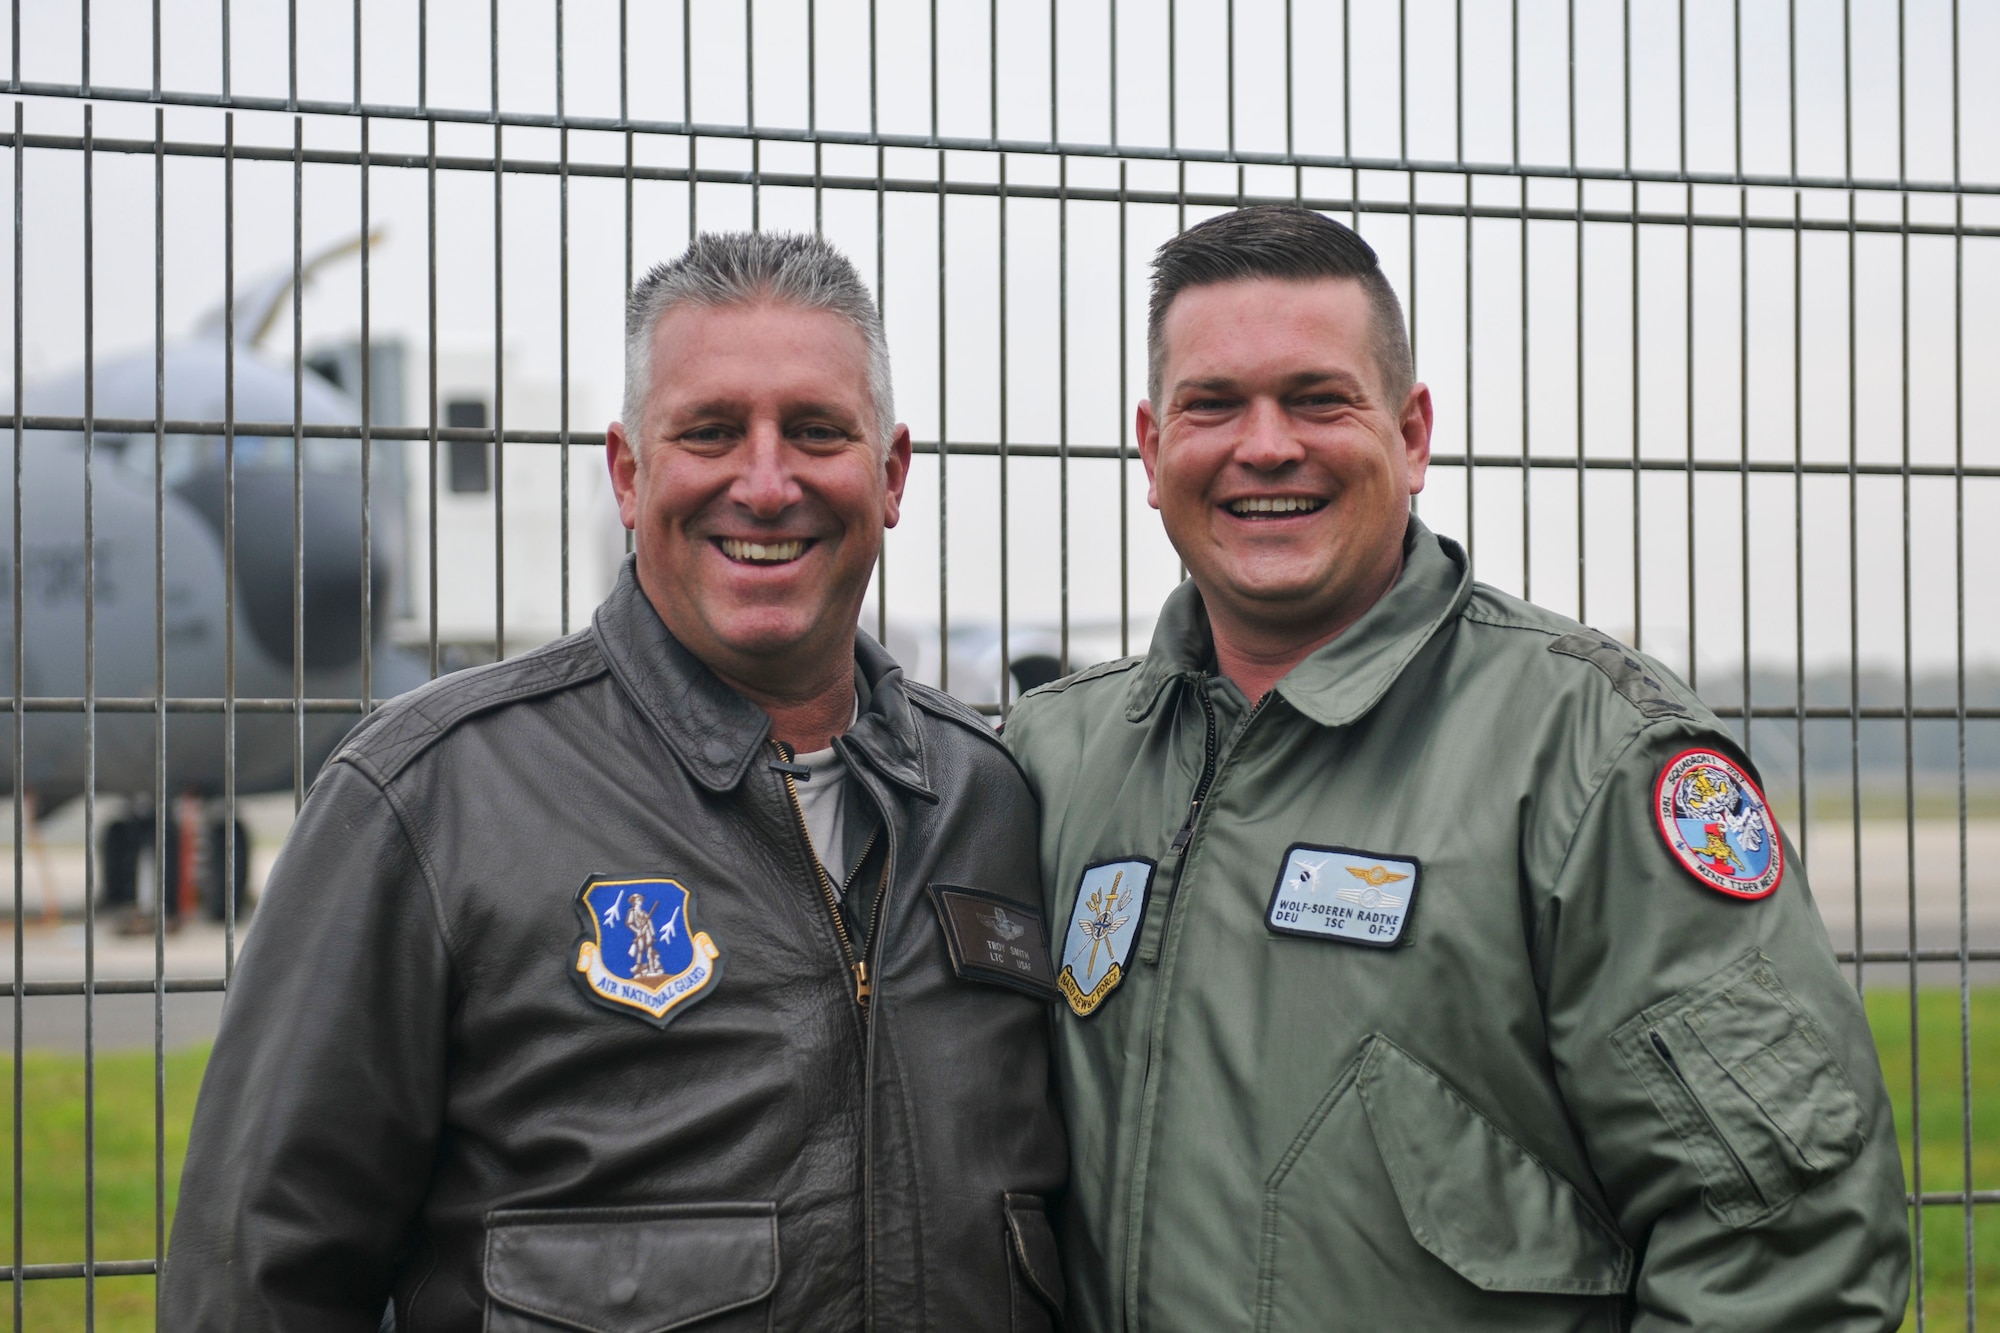 U.S. Air Force Lt. Col. Troy Smith poses with German Air Force Capt. Wolf-Soren Radke Nov. 19, 2019, at NATO Air Base Geilenkirchen. Smith and Radke are continuing a friendship their fathers, who were also military members, started years ago. (U.S. Air National Guard photo by Senior Airman Christi Richter)